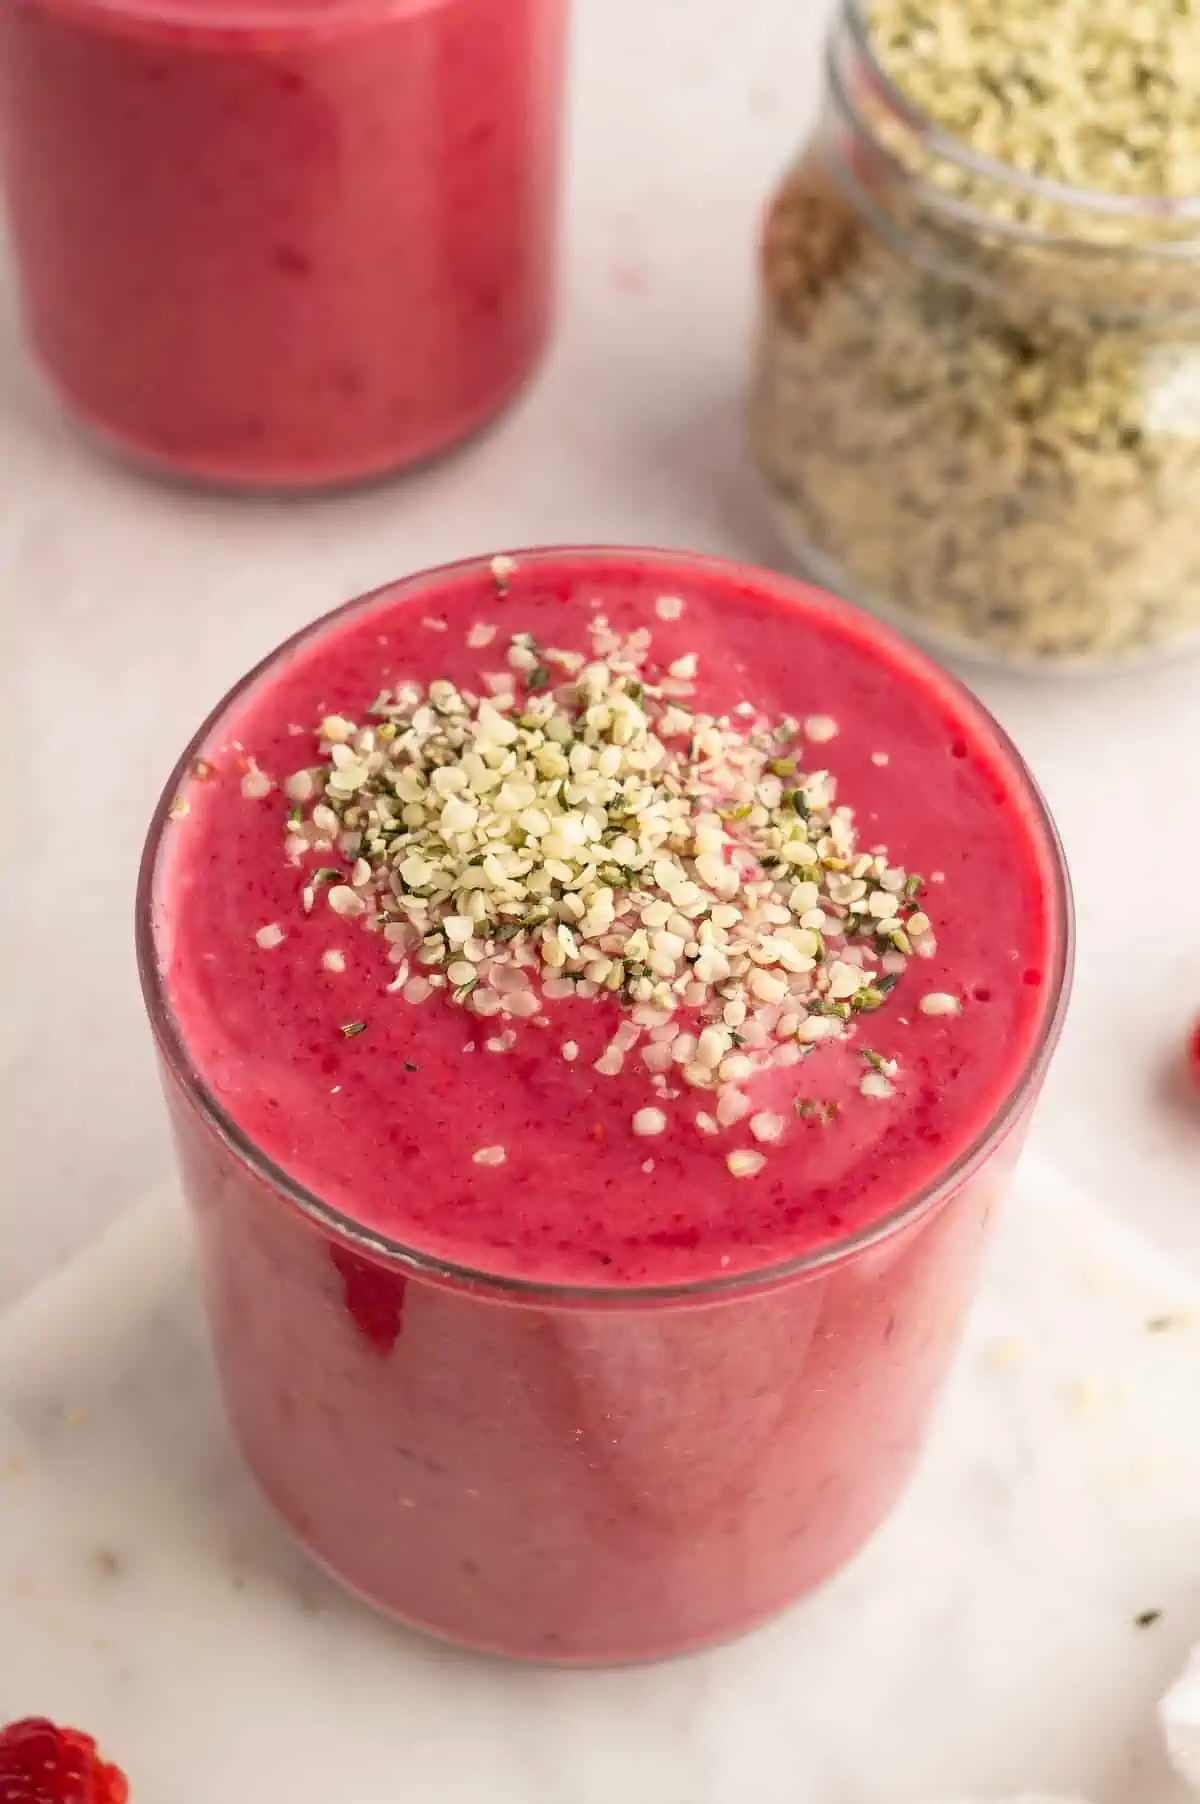 A raspberry smoothie topped with hemp seeds.